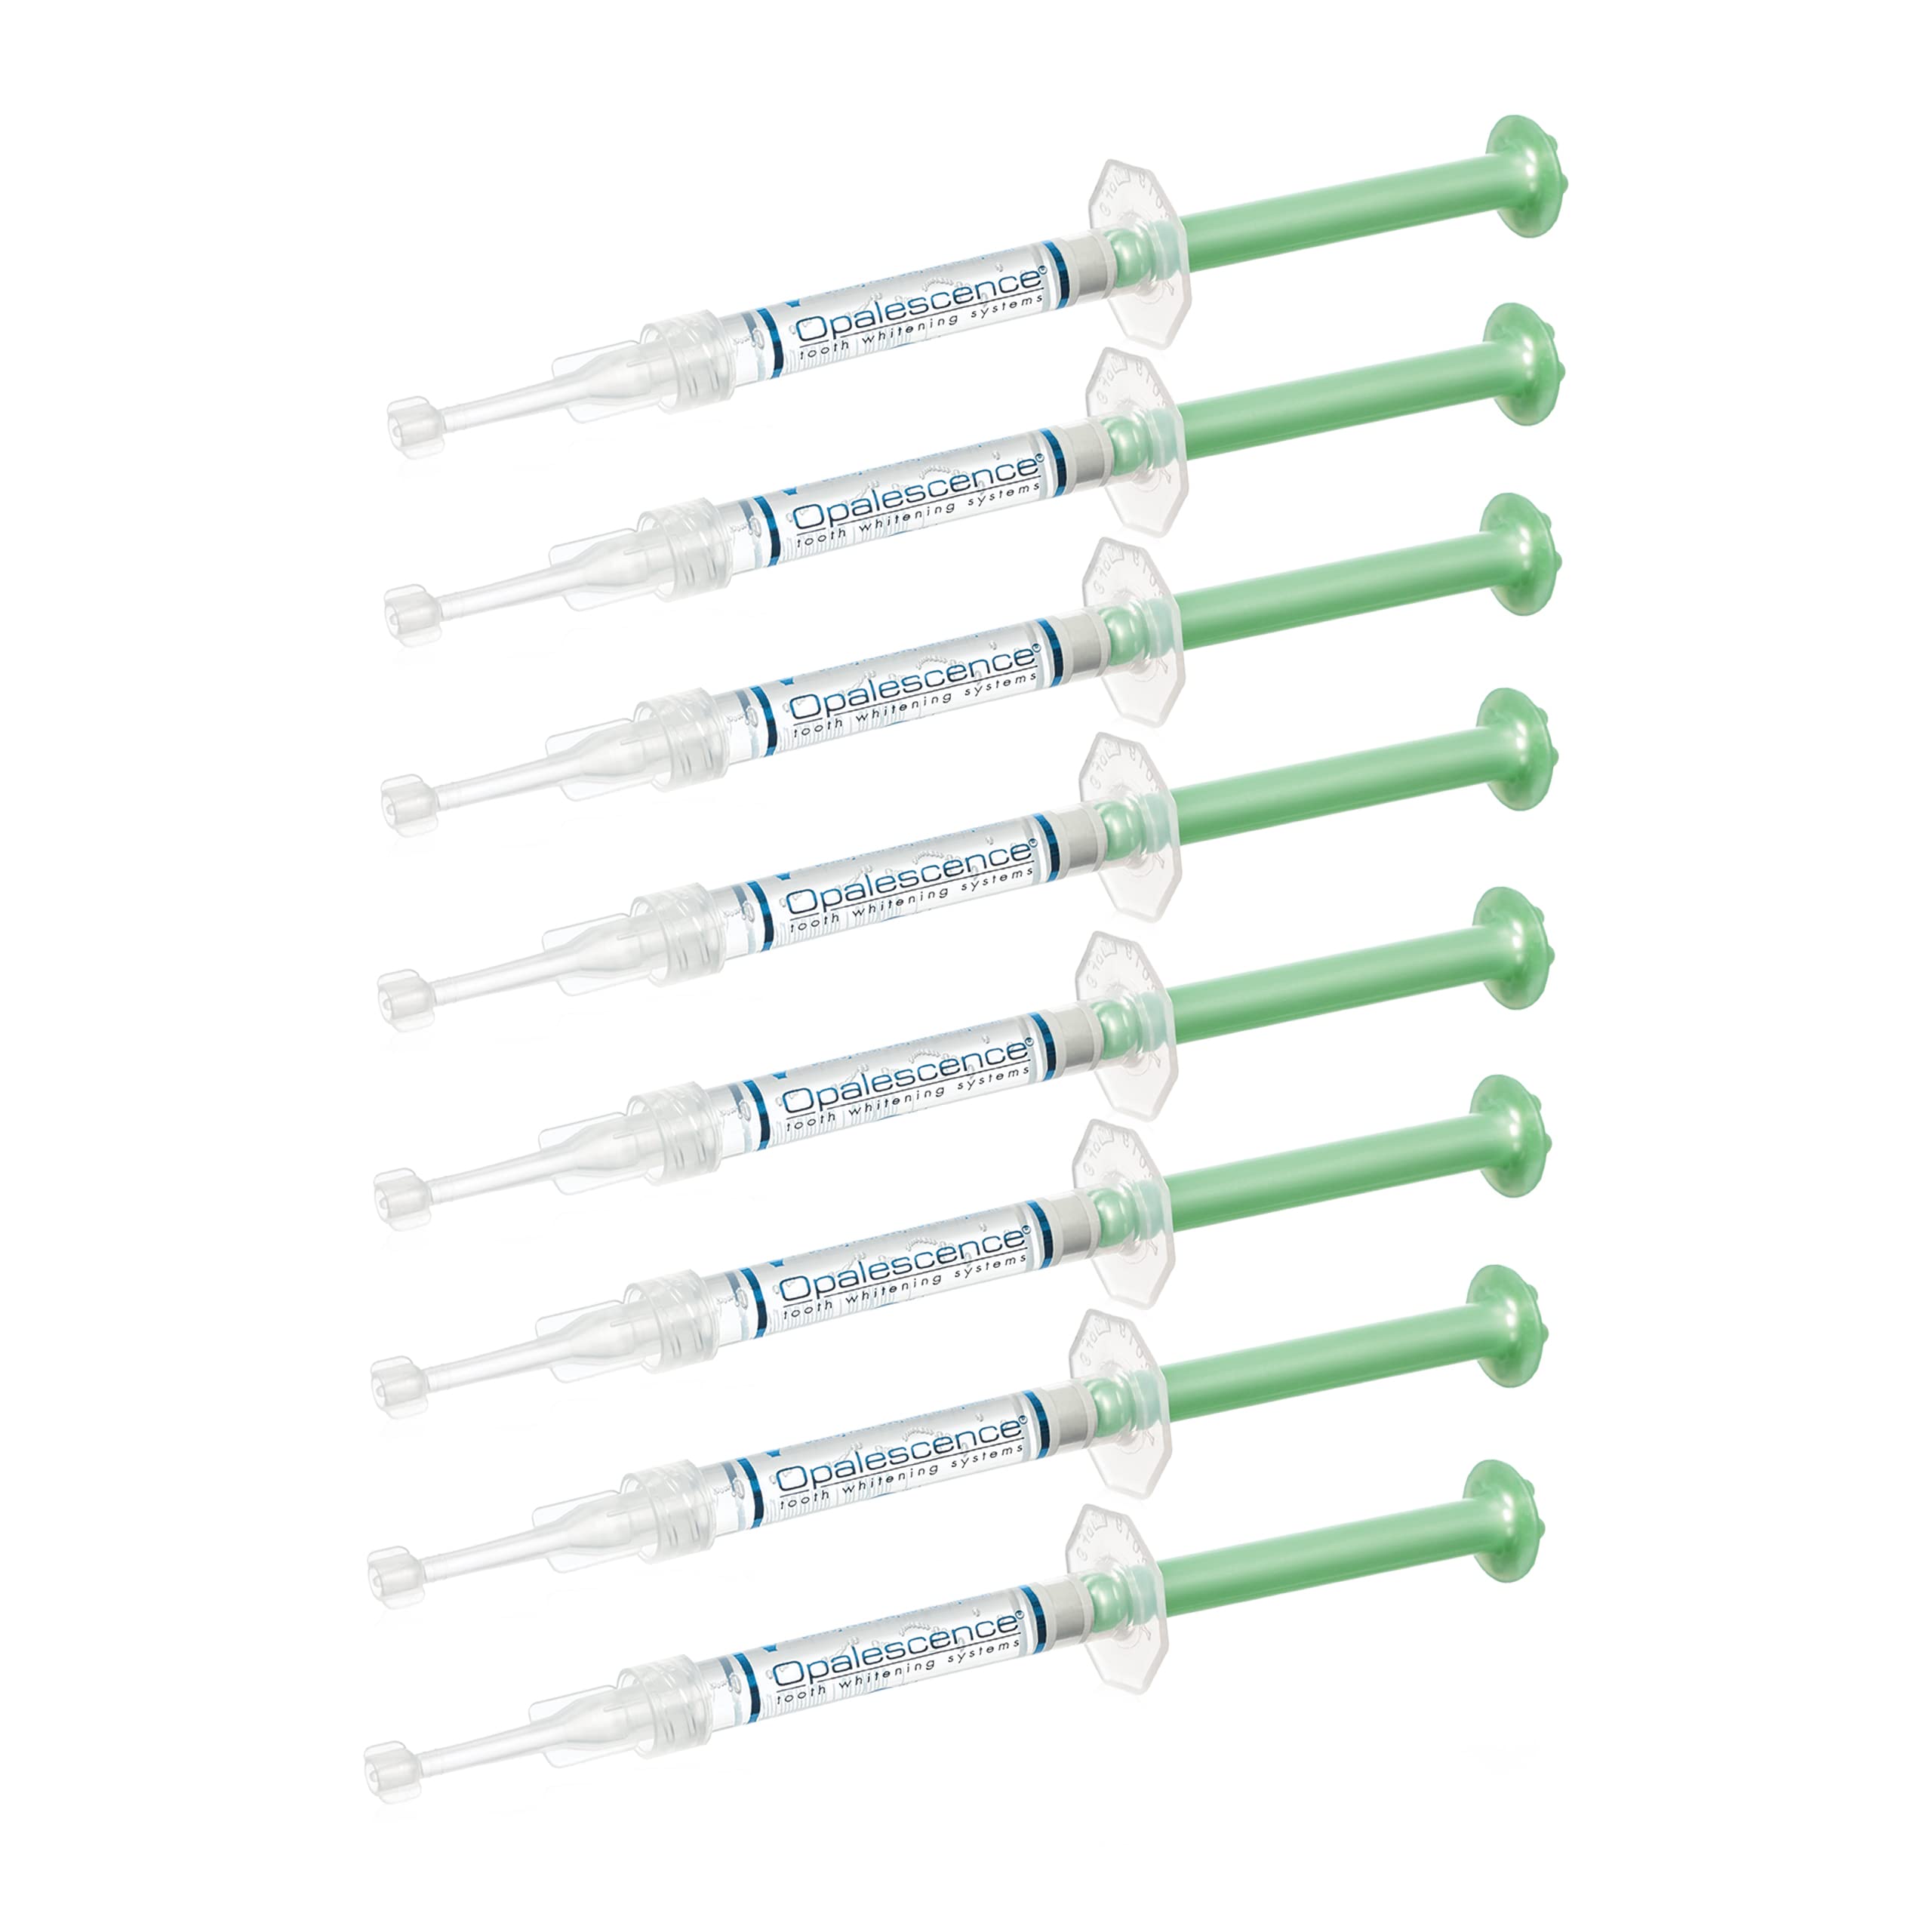 Opalescence at Home Teeth Whitening - Teeth Whitening Gel Syringes - 8 Pack of 15% Syringes - Mint